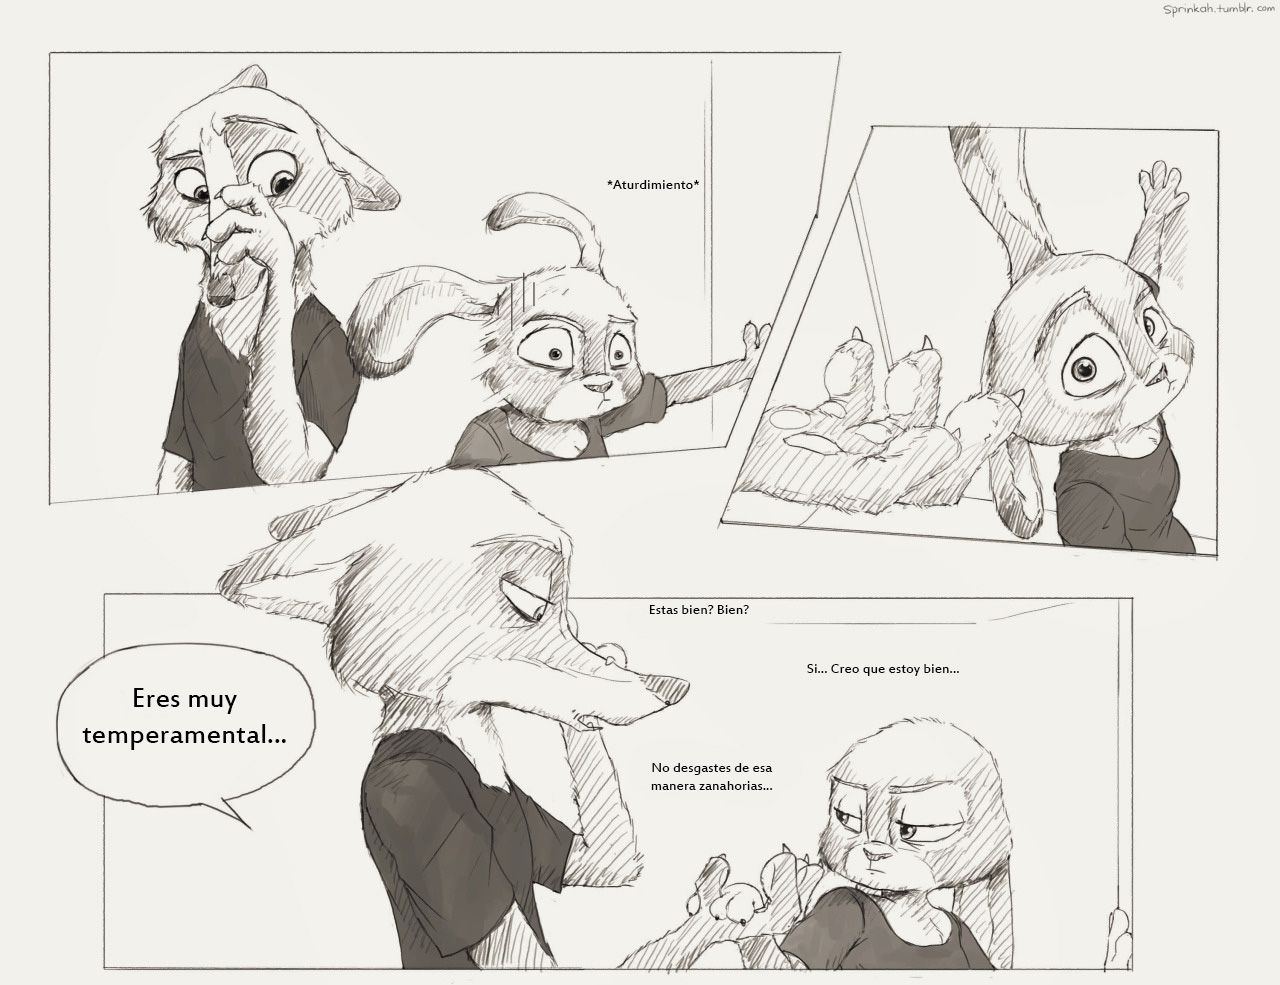 [Sprinkah] This is what true love looks like (Zootopia) (Spanish) (On Going) [Landsec] http://sprinkah.tumblr.com/ 4